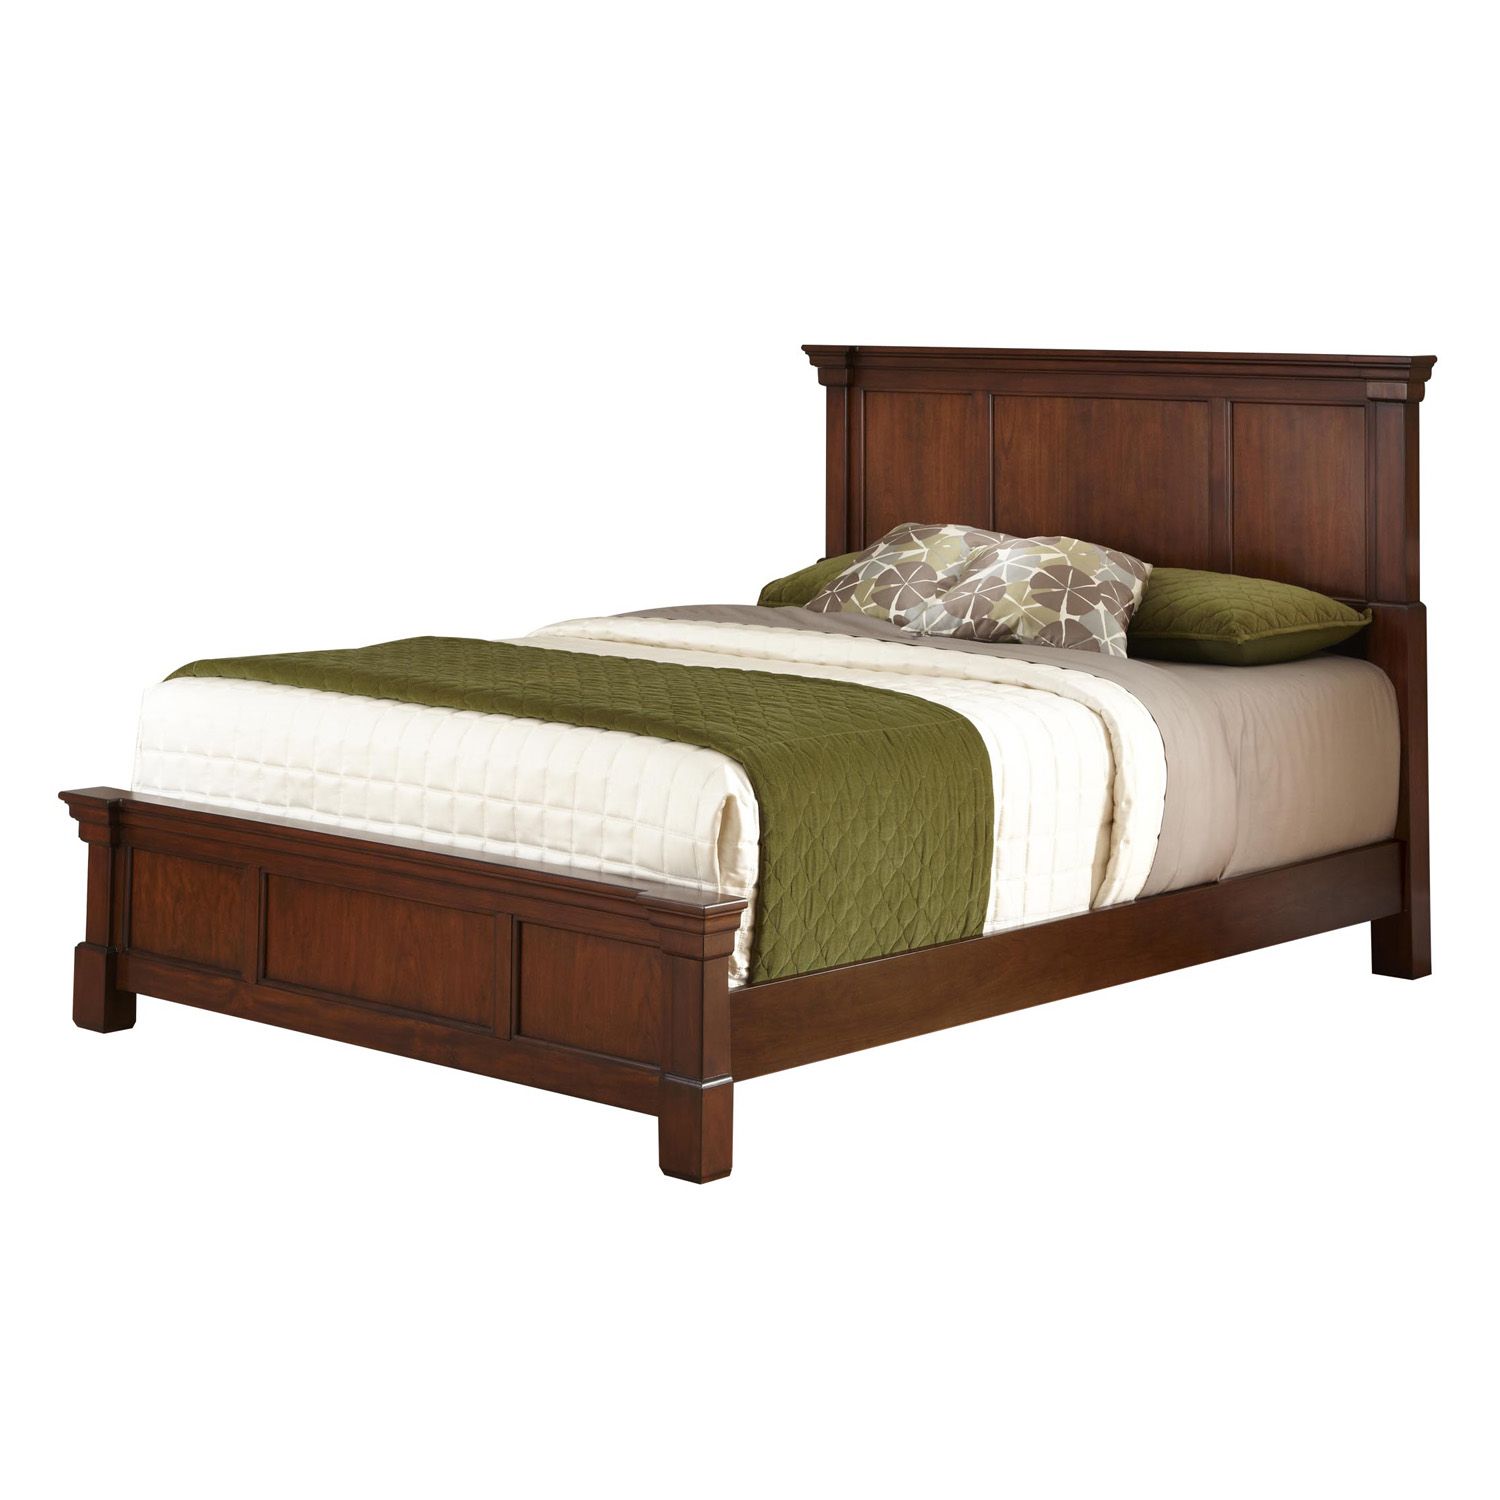 Image for homestyles Aspen 3-pc. Queen Headboard, Footboard and Frame Set at Kohl's.